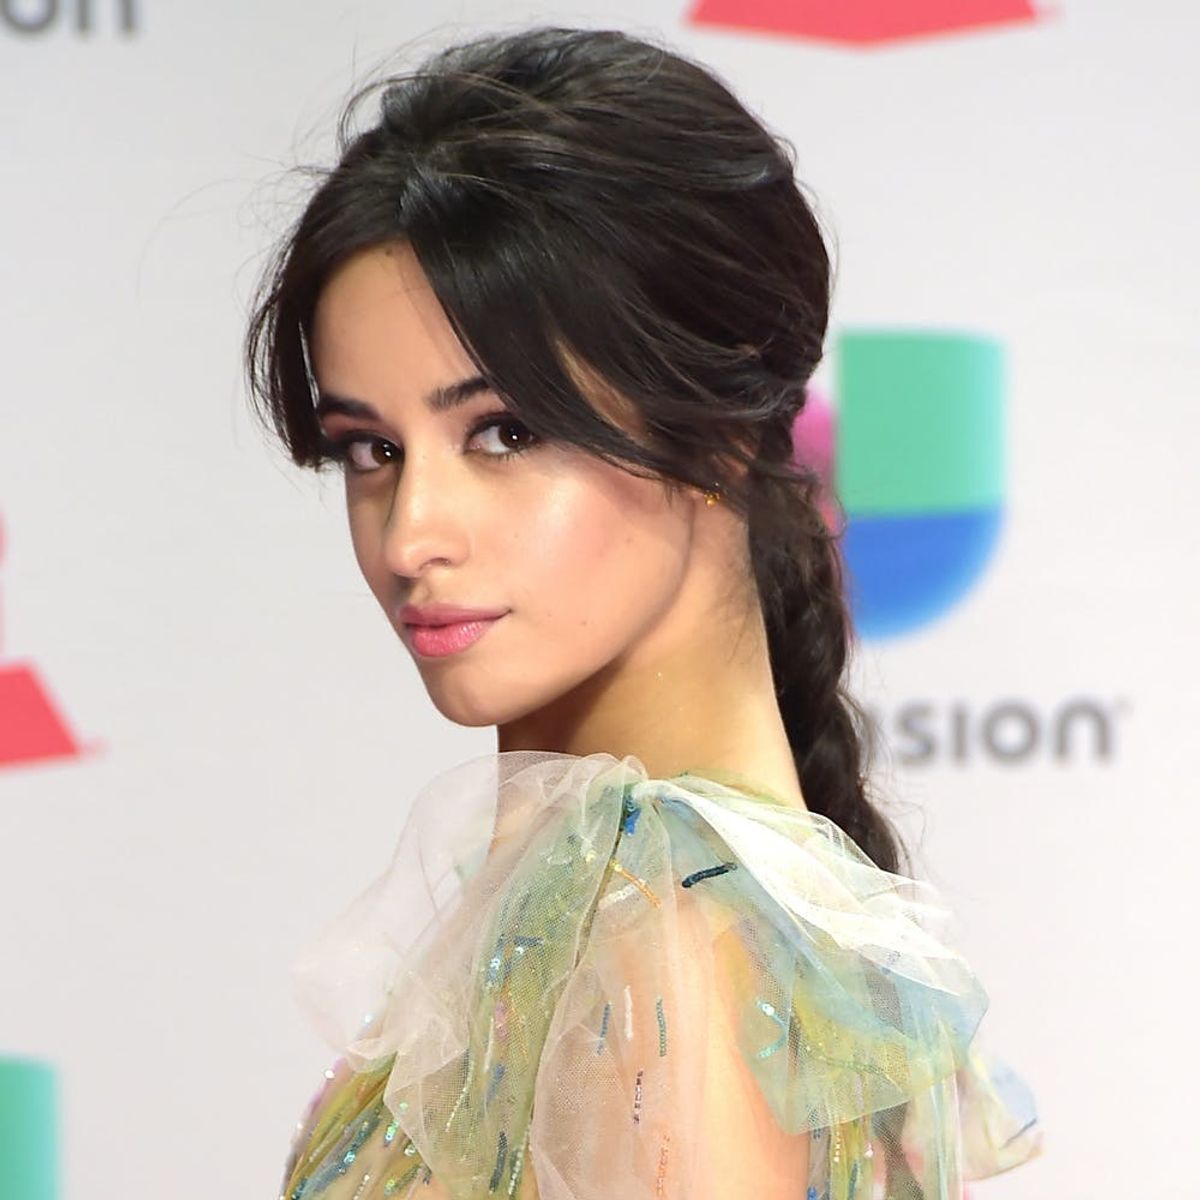 Camila Cabello Says She Was ‘Hurt’ by That Fifth Harmony VMAs Diss